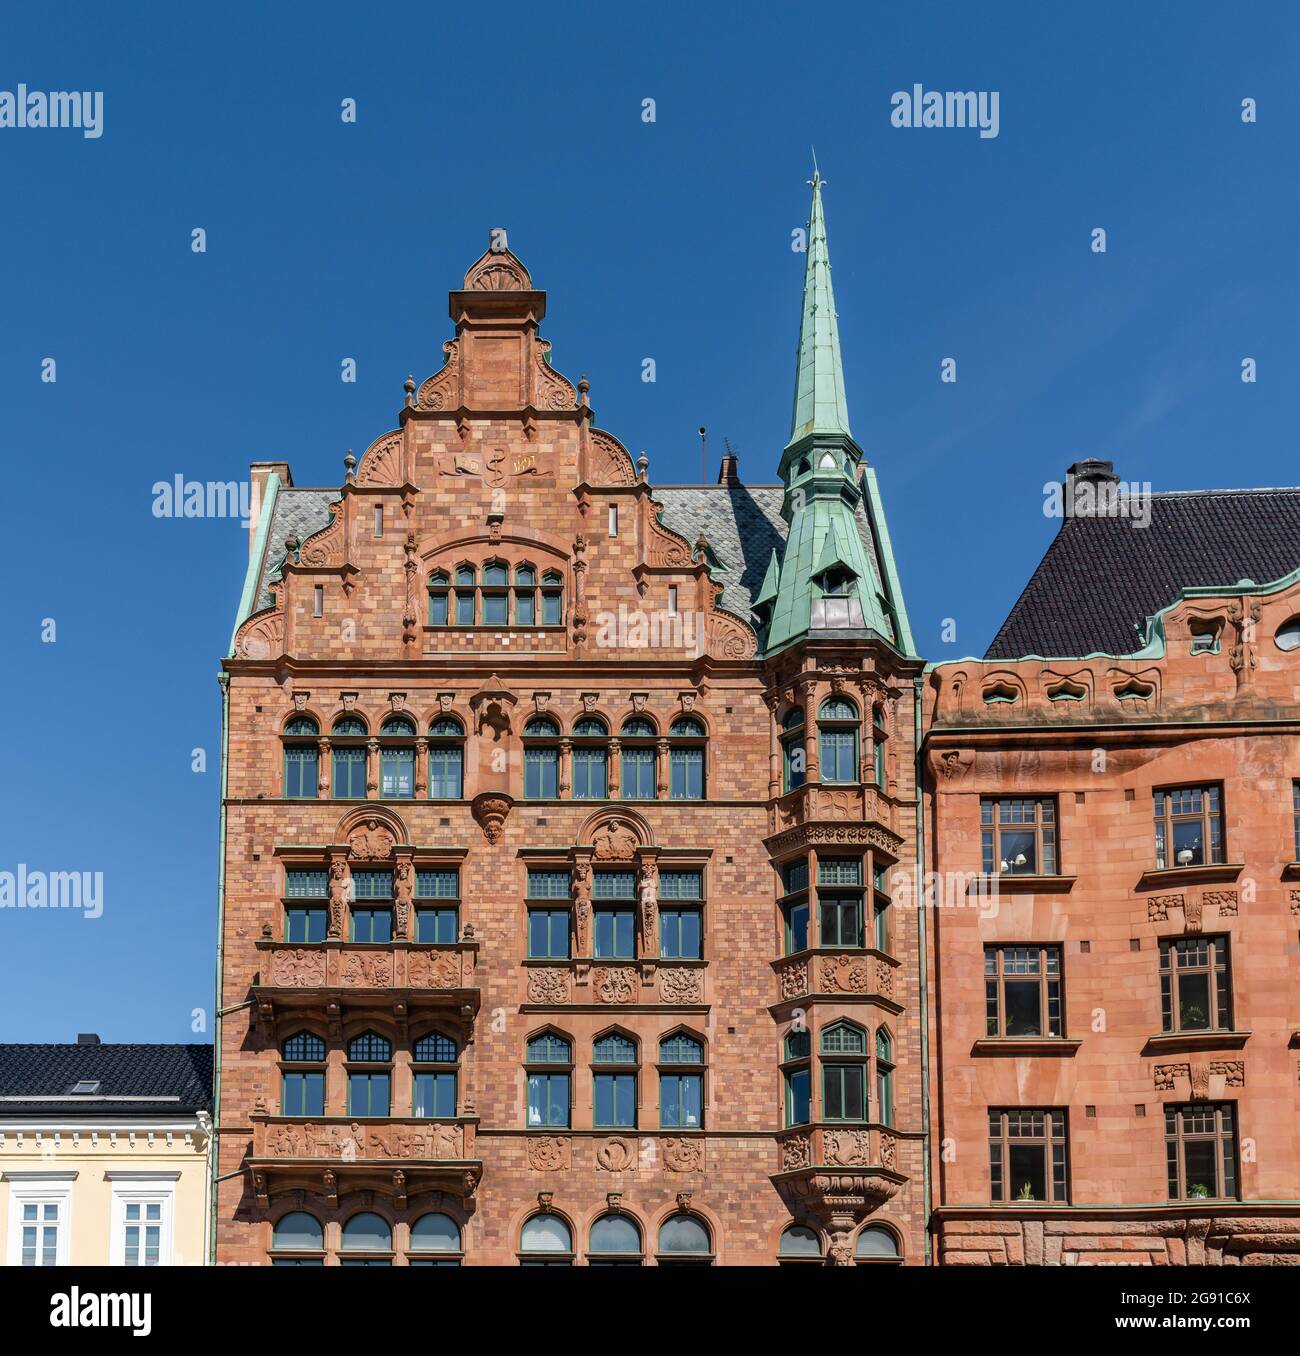 Lejonet Pharmacy building at Stortorget Square - the oldest pharmacy of Sweden - Malmo, Sweden Stock Photo